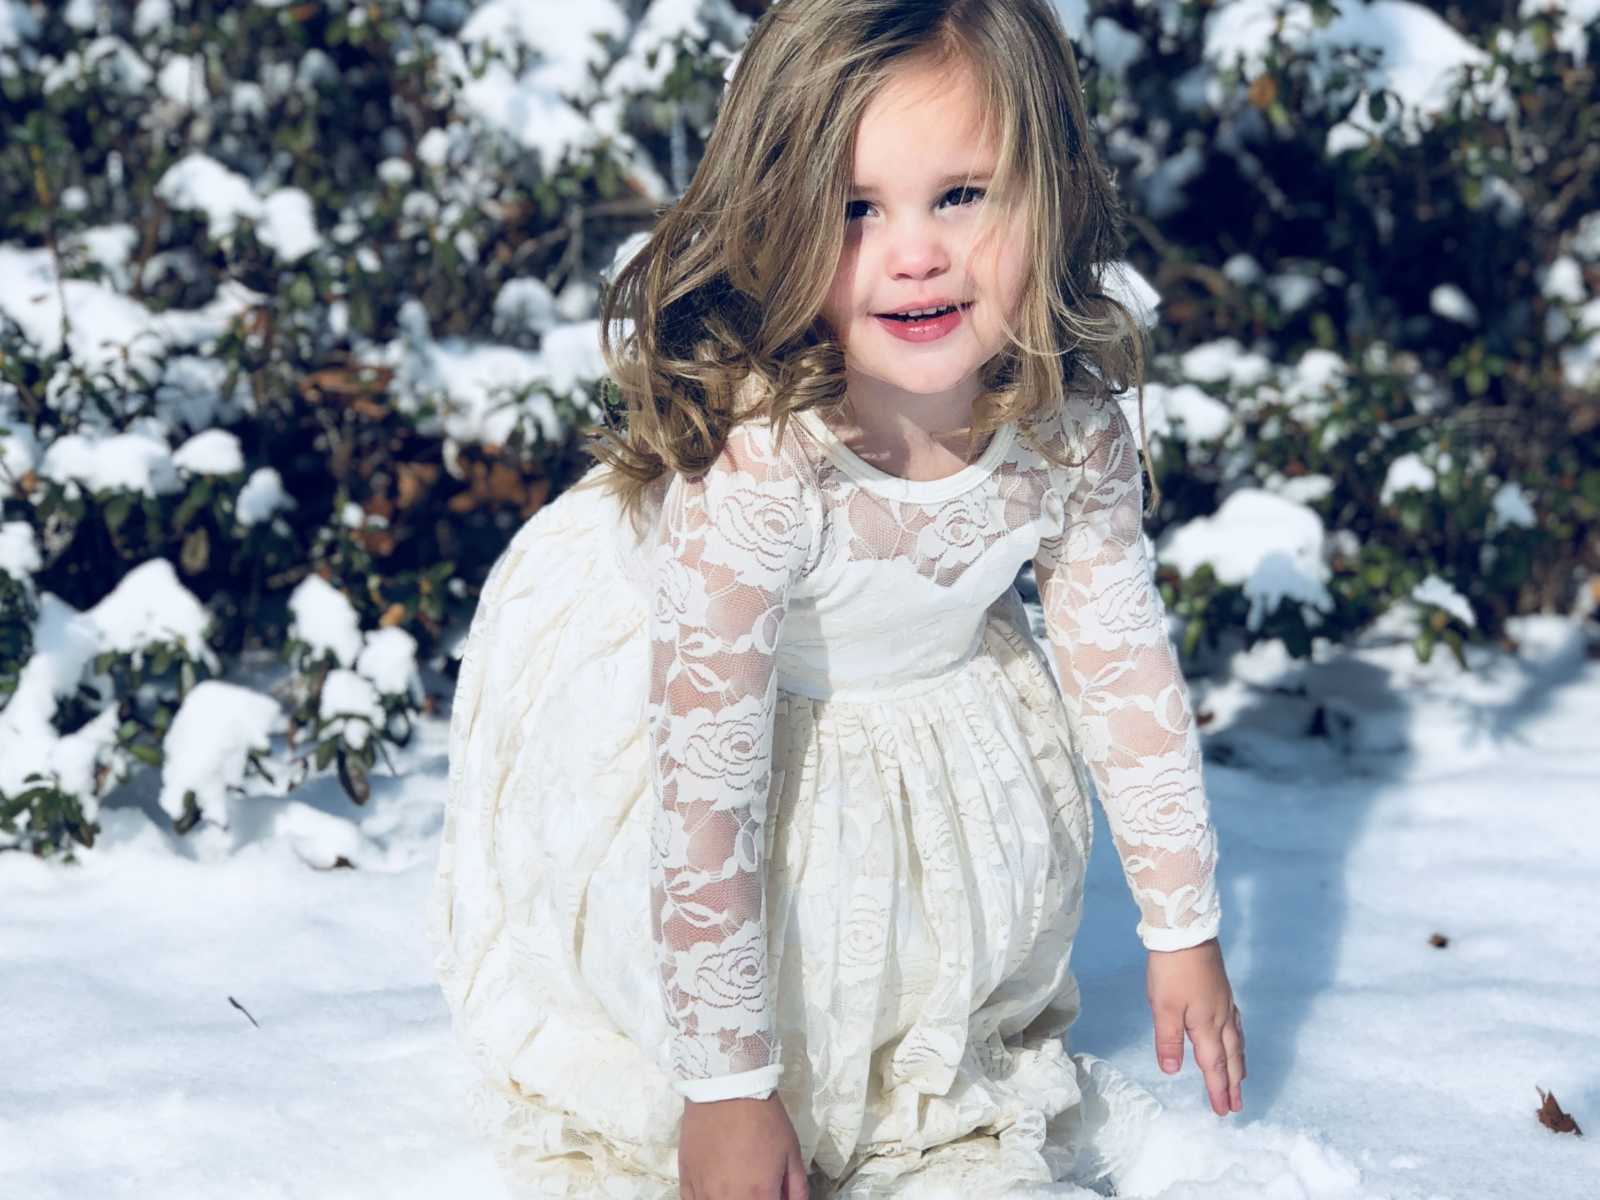 young girl in white floral lace dress crouching down to the snowy ground